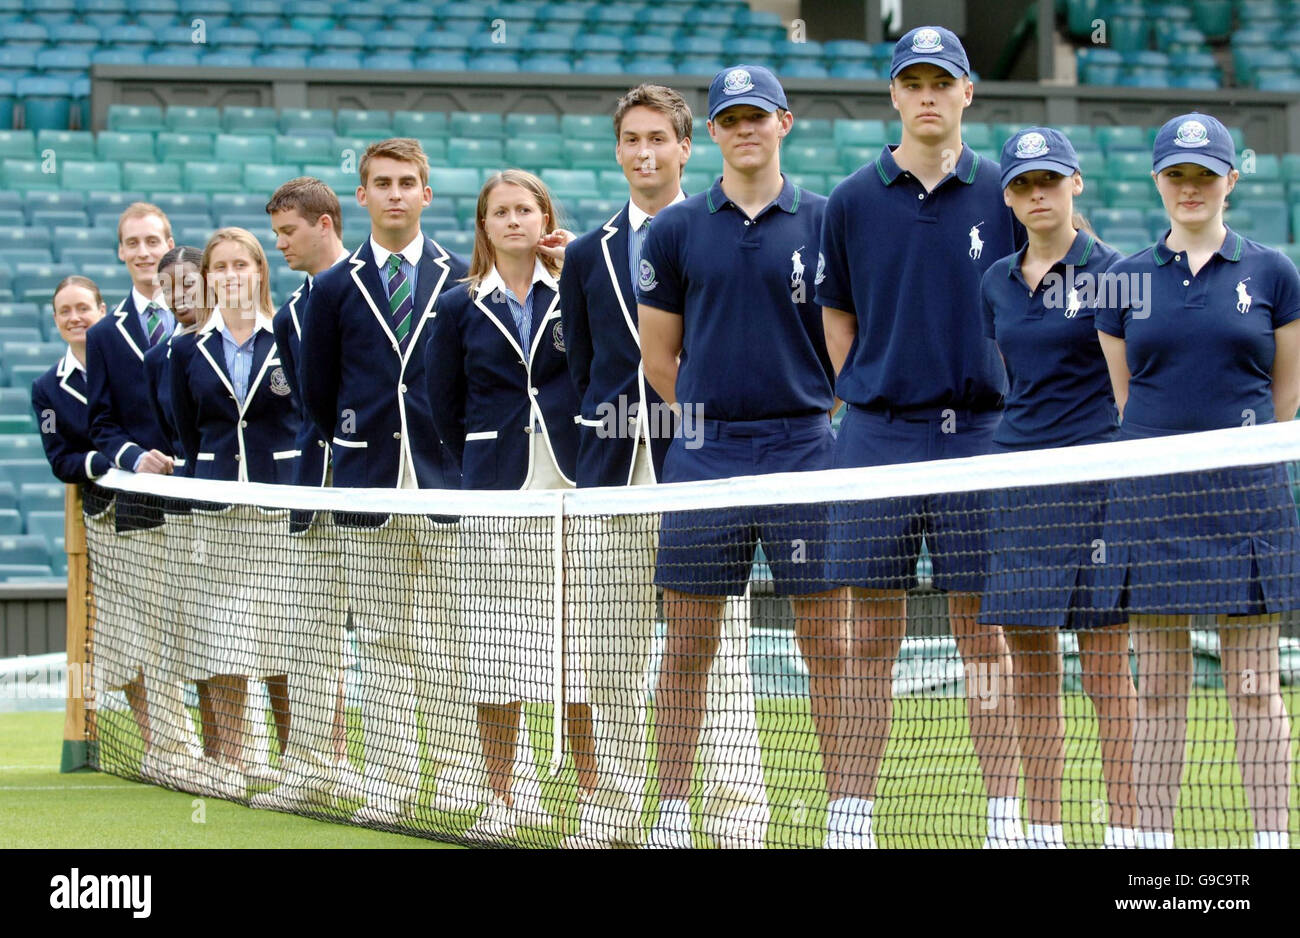 Wimbledon court officials and ball persons model the new polo